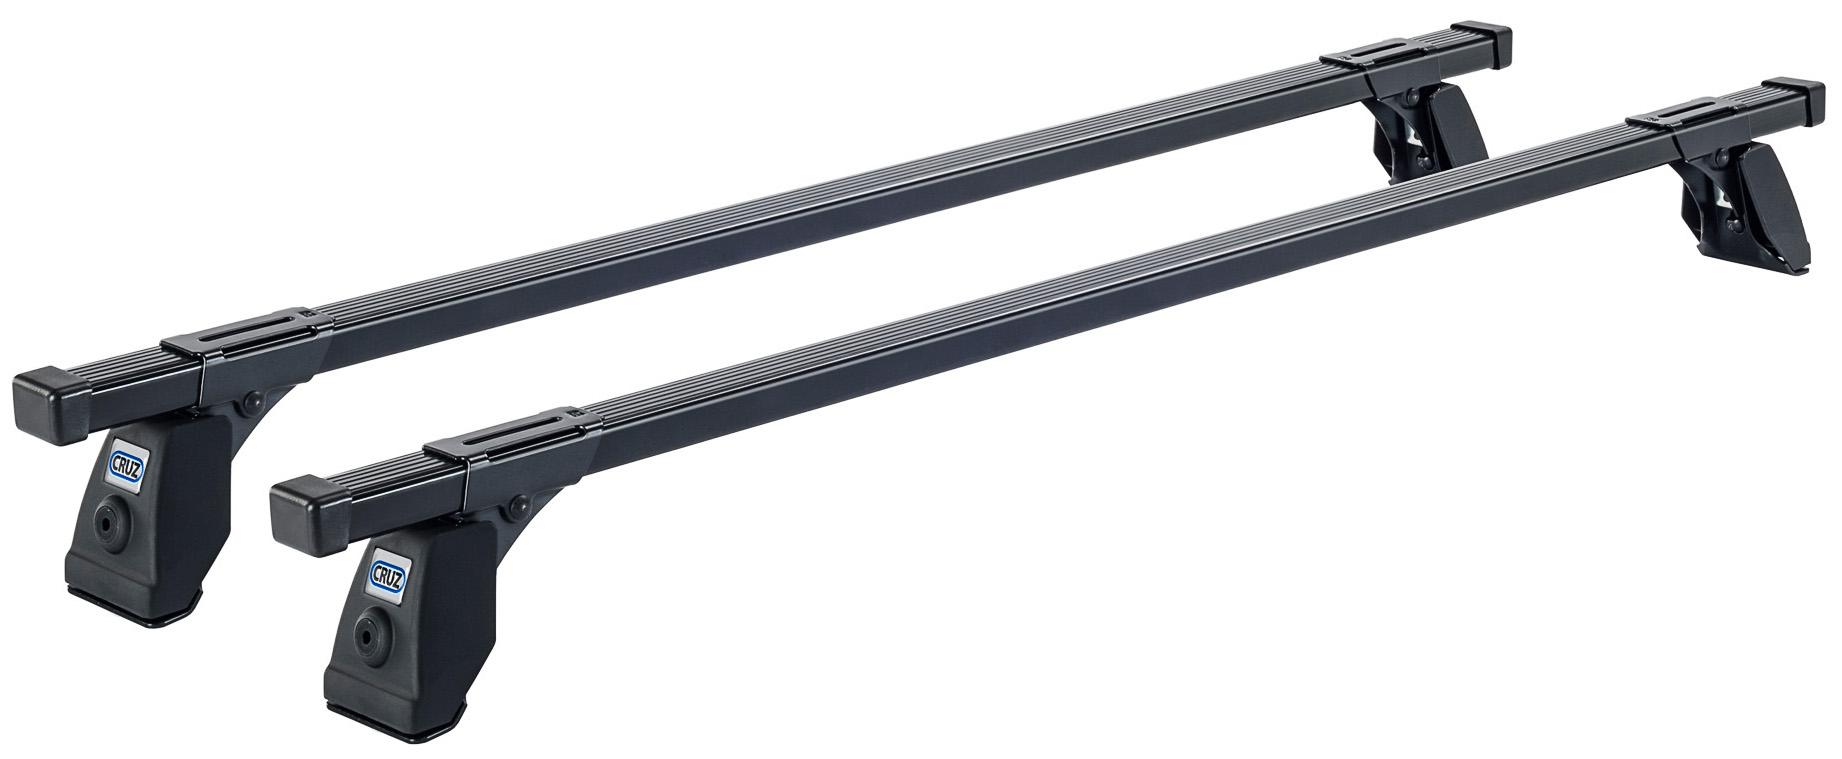 Cruz Commercial Roof Bars 30 X 20 922-005 - Pack Of 2